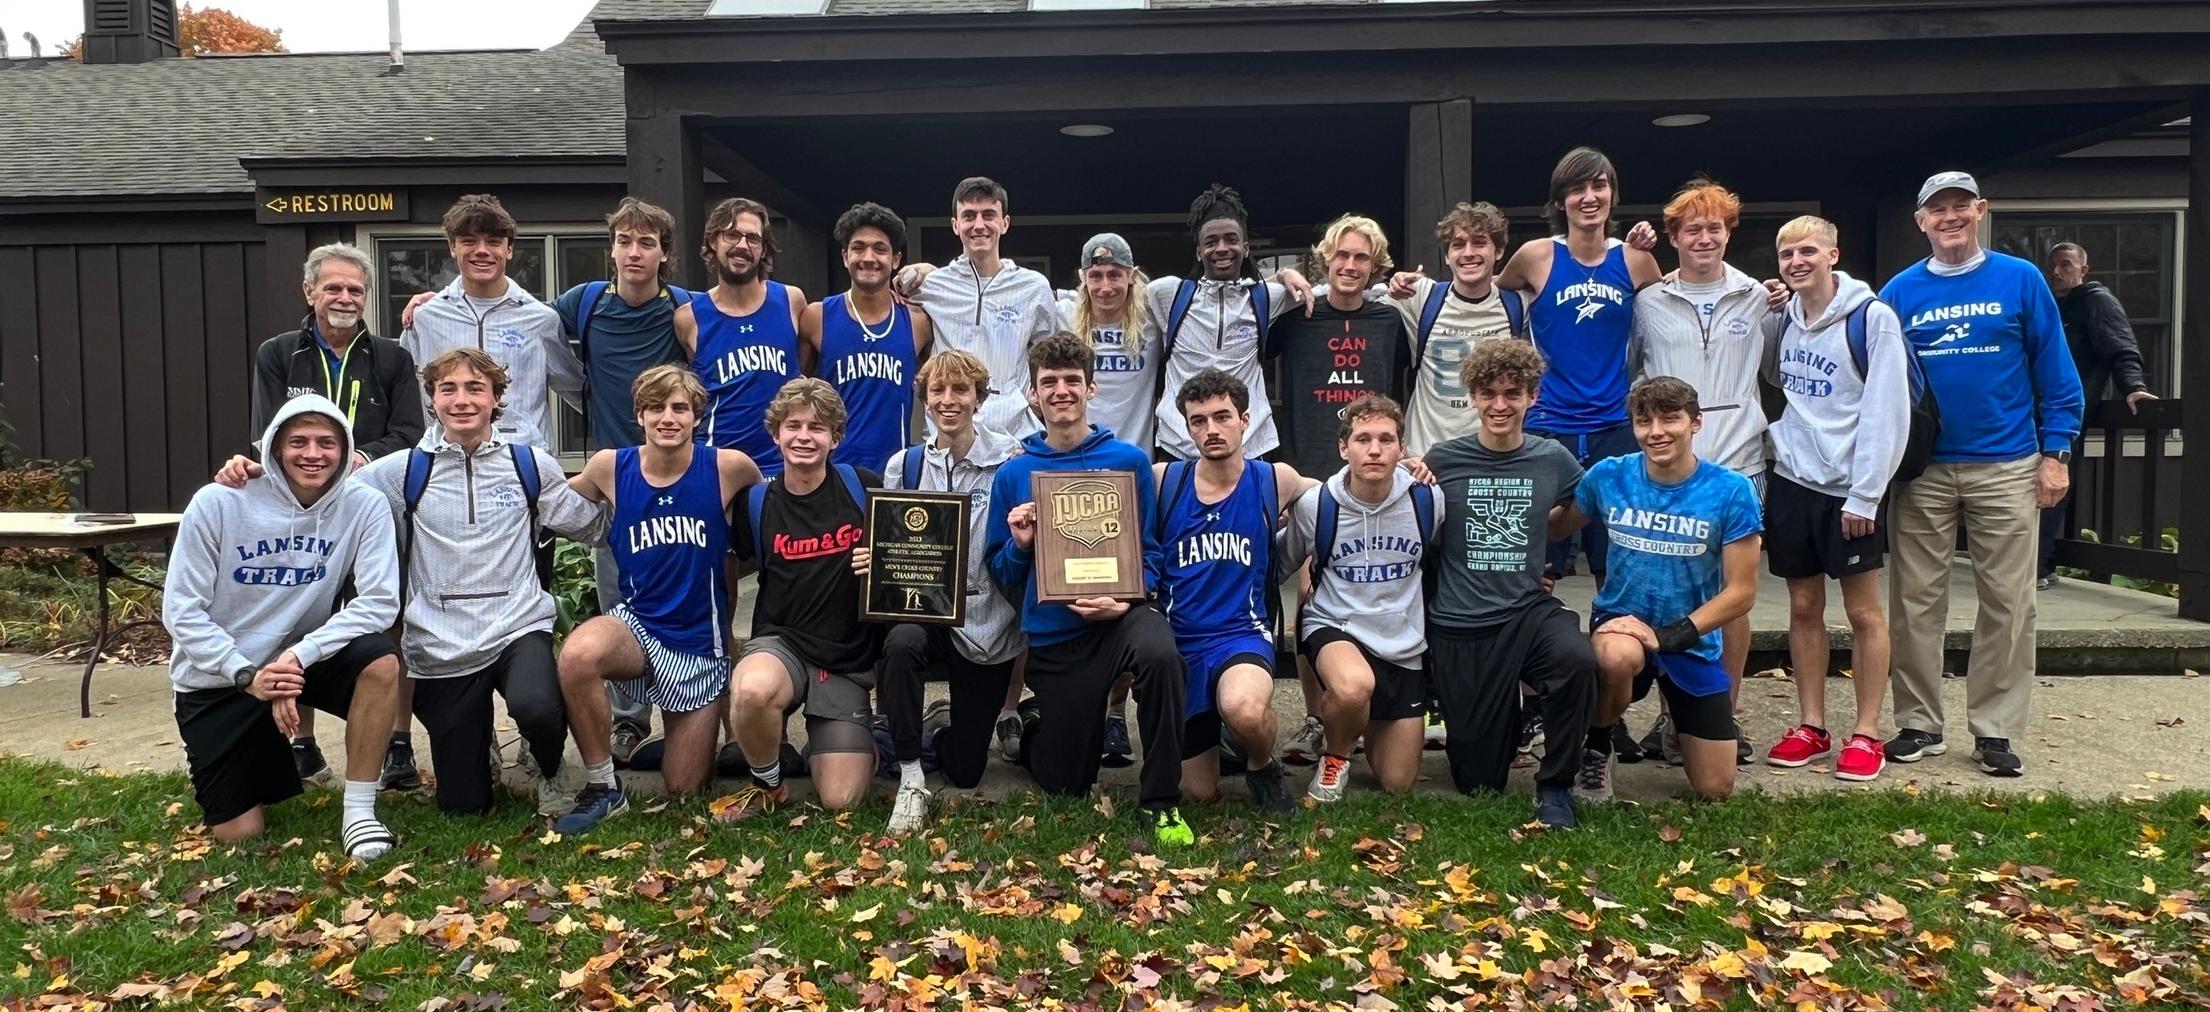 Stars Continue to Shine! Lansing Remains on Top of Region 12 Division II Men&rsquo;s Cross Country Scene